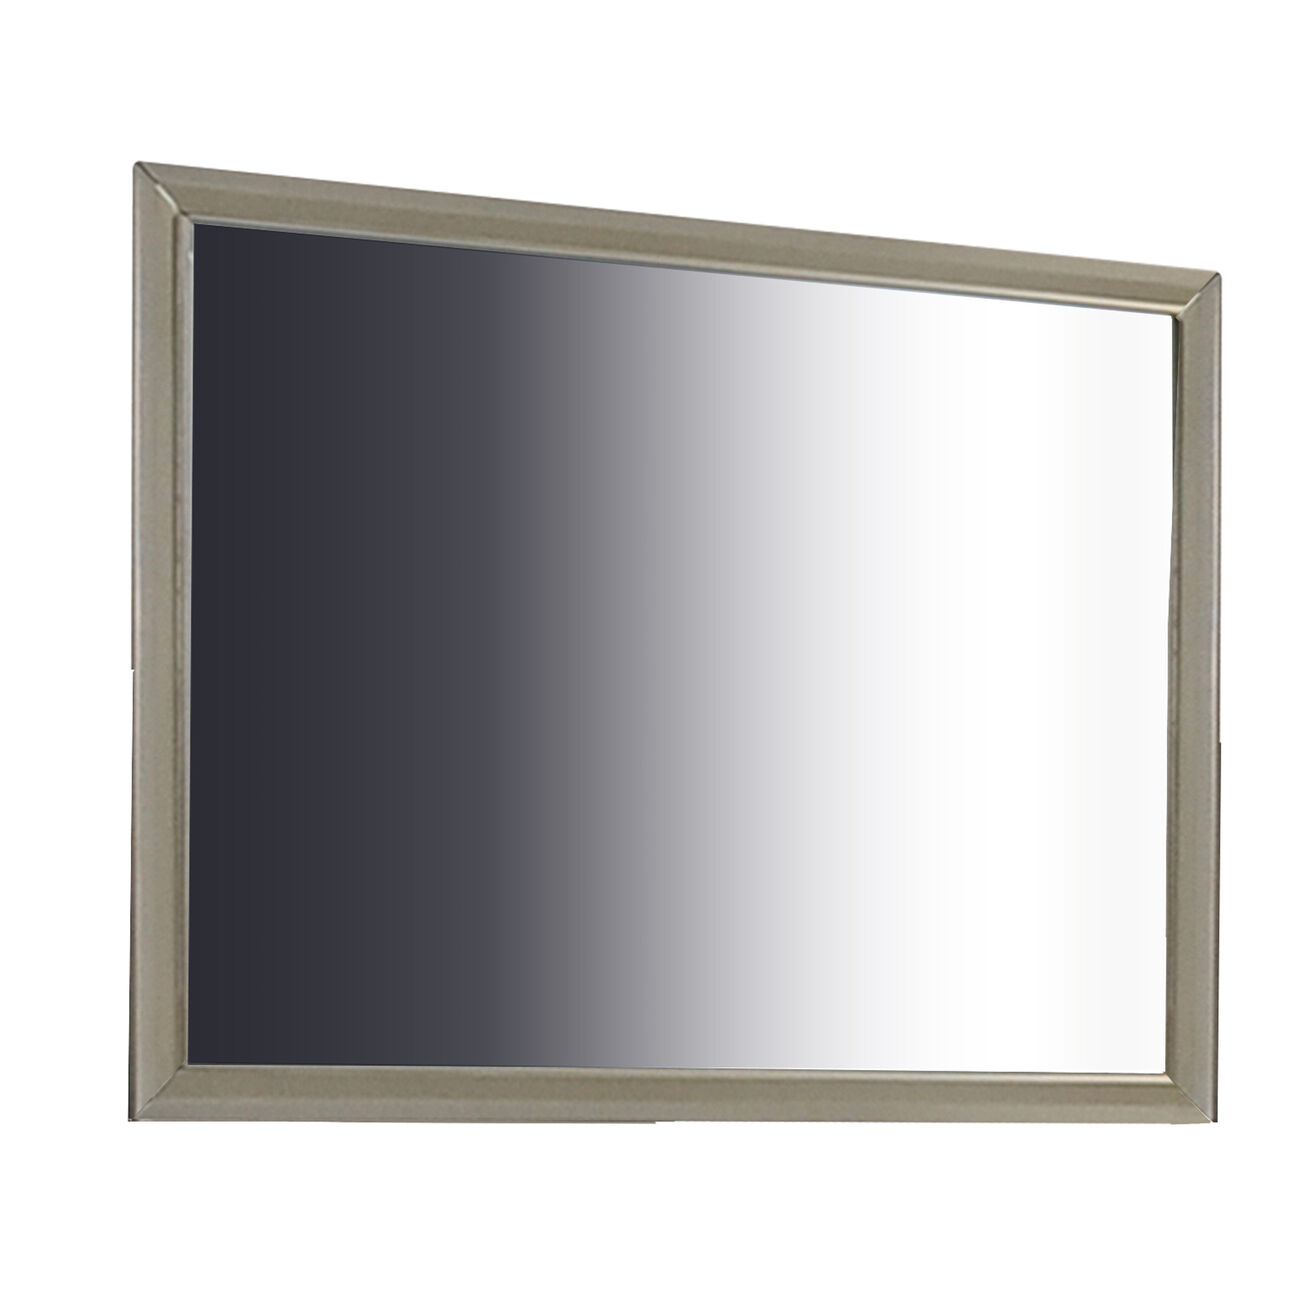 Wooden Clean Lines Framed Mirror with Rectangular Shape, Silver